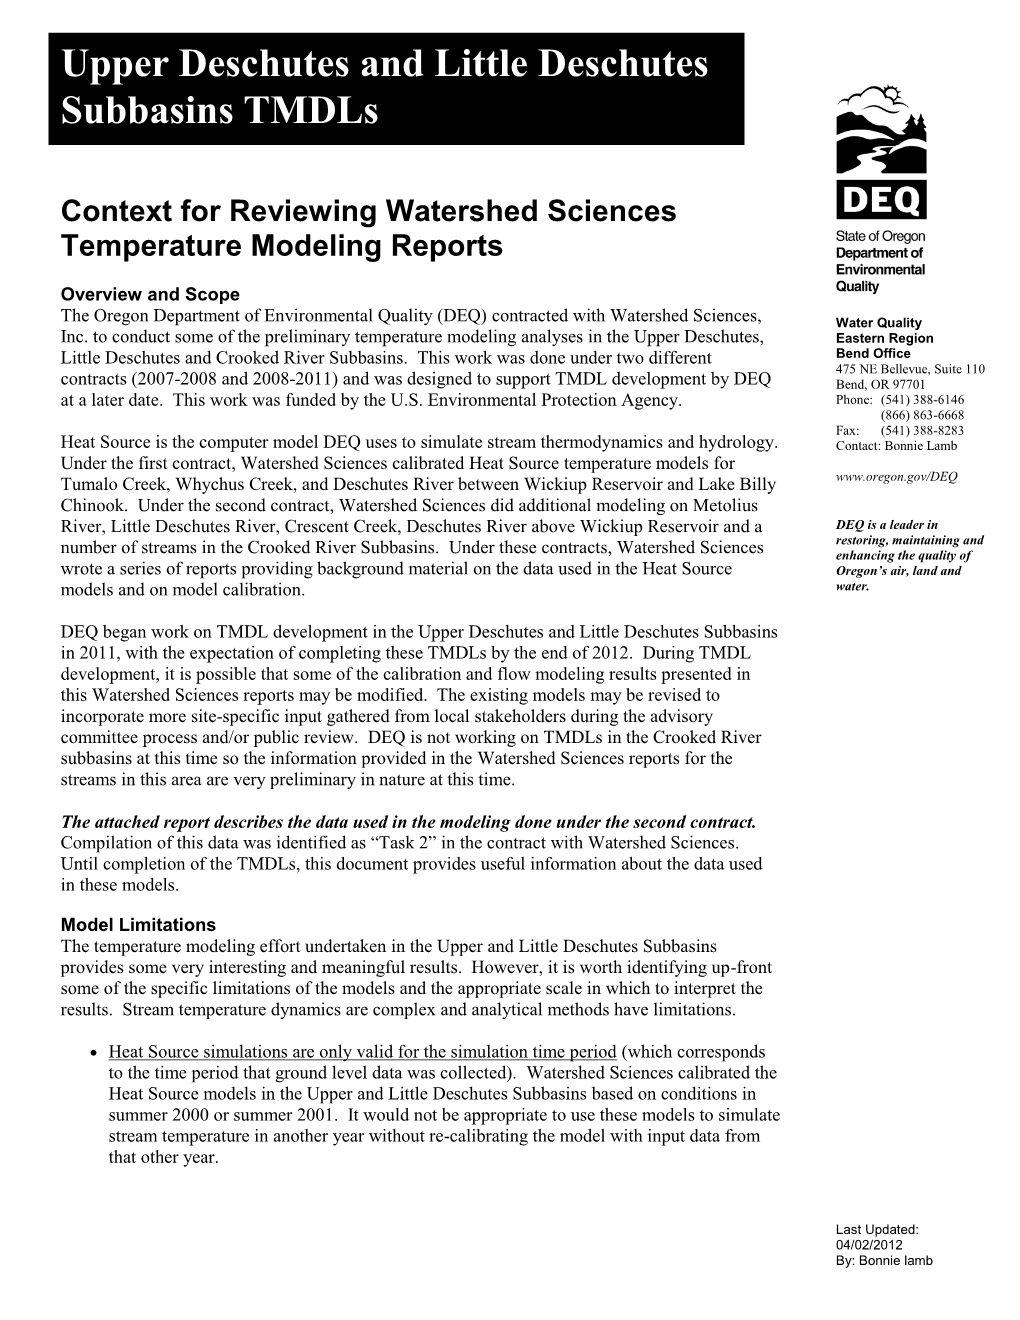 Context for Reviewing Watershed Sciences Temperature Modeling Reports